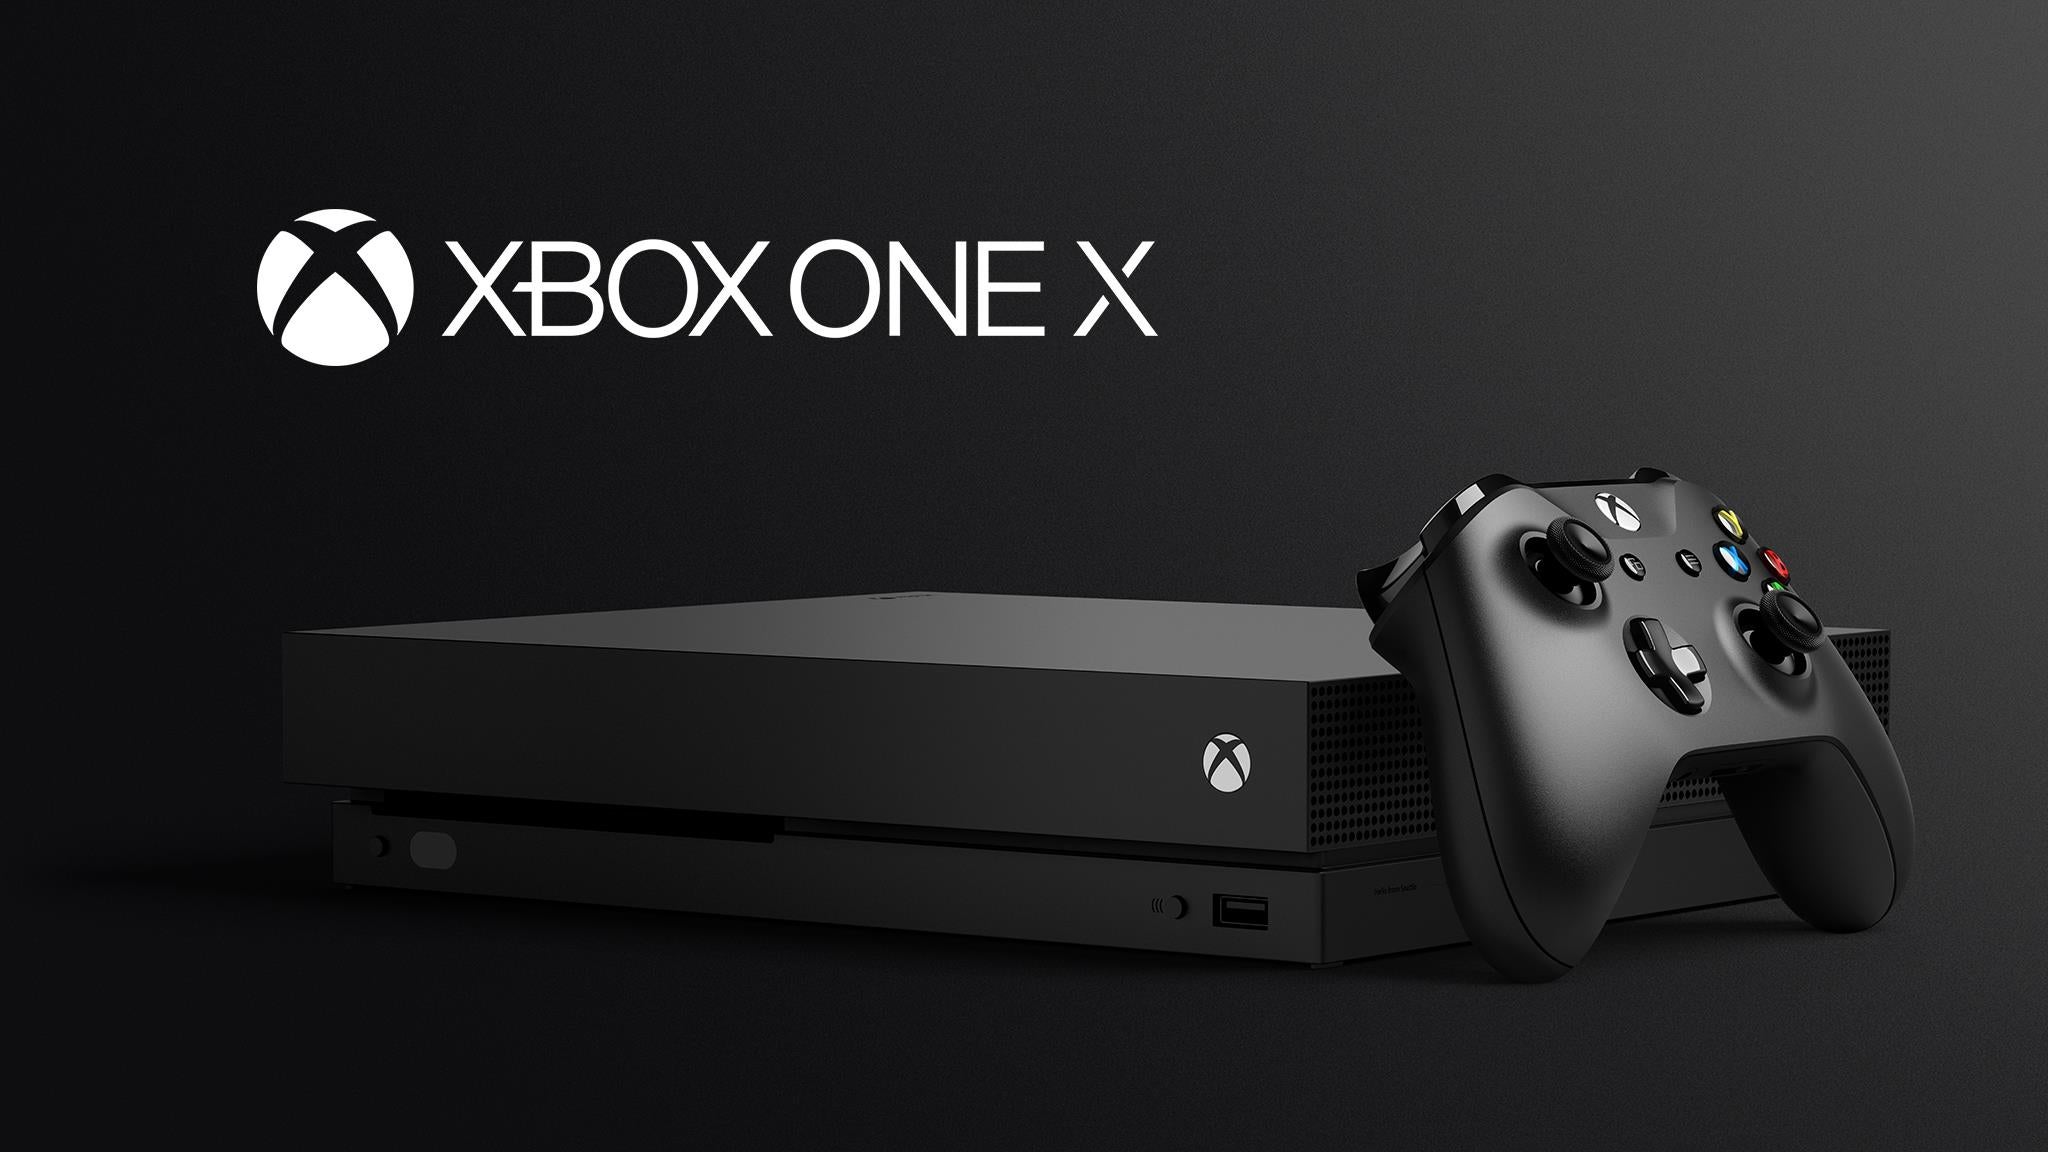 Image for Xbox One X should sell 17 million systems by 2021